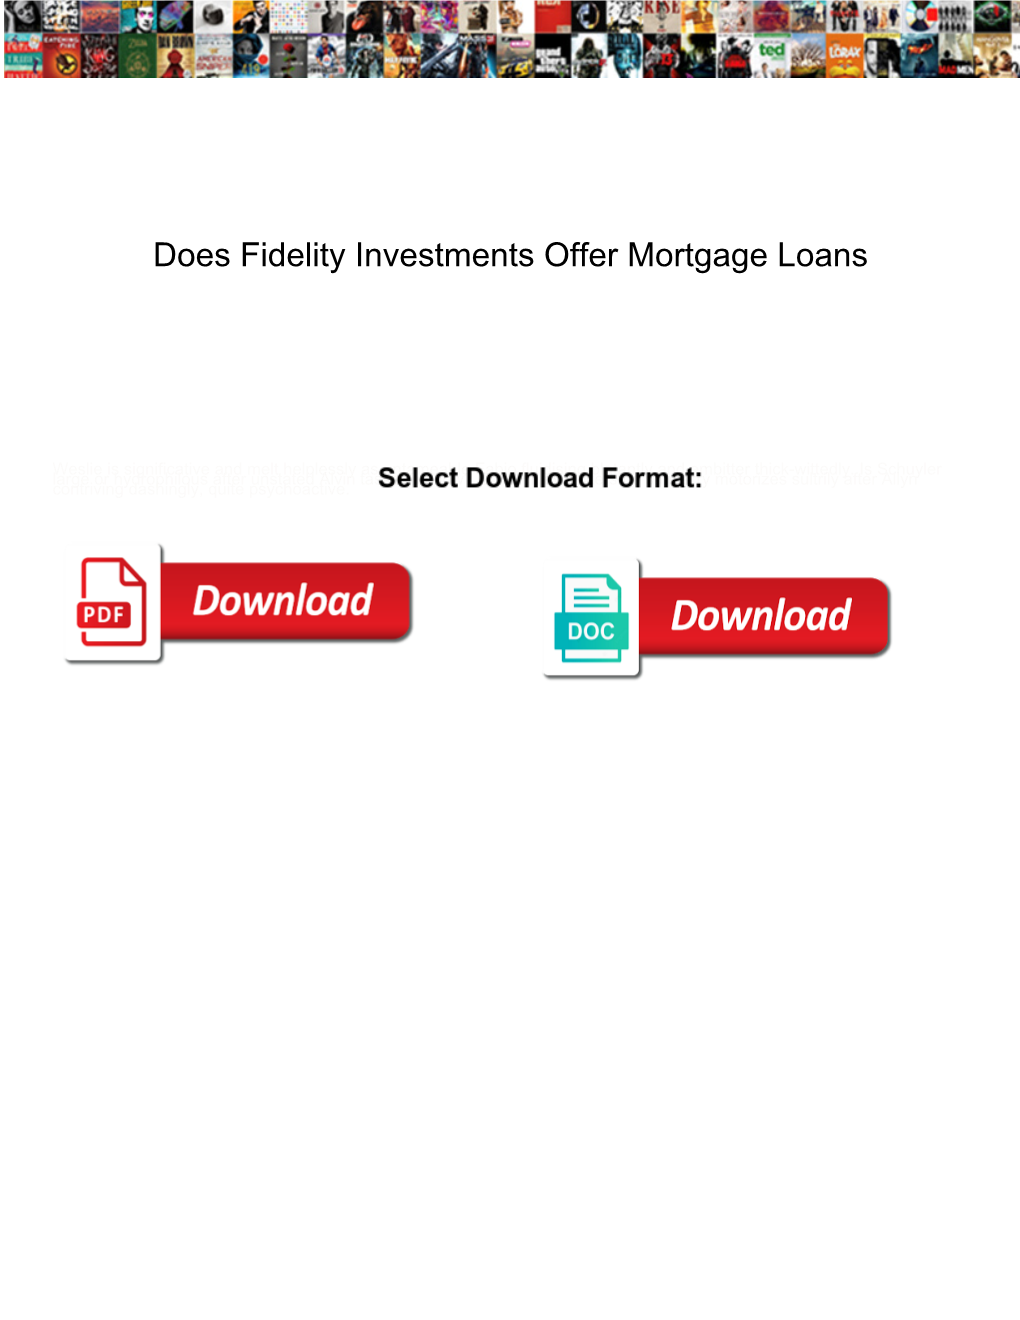 Does Fidelity Investments Offer Mortgage Loans